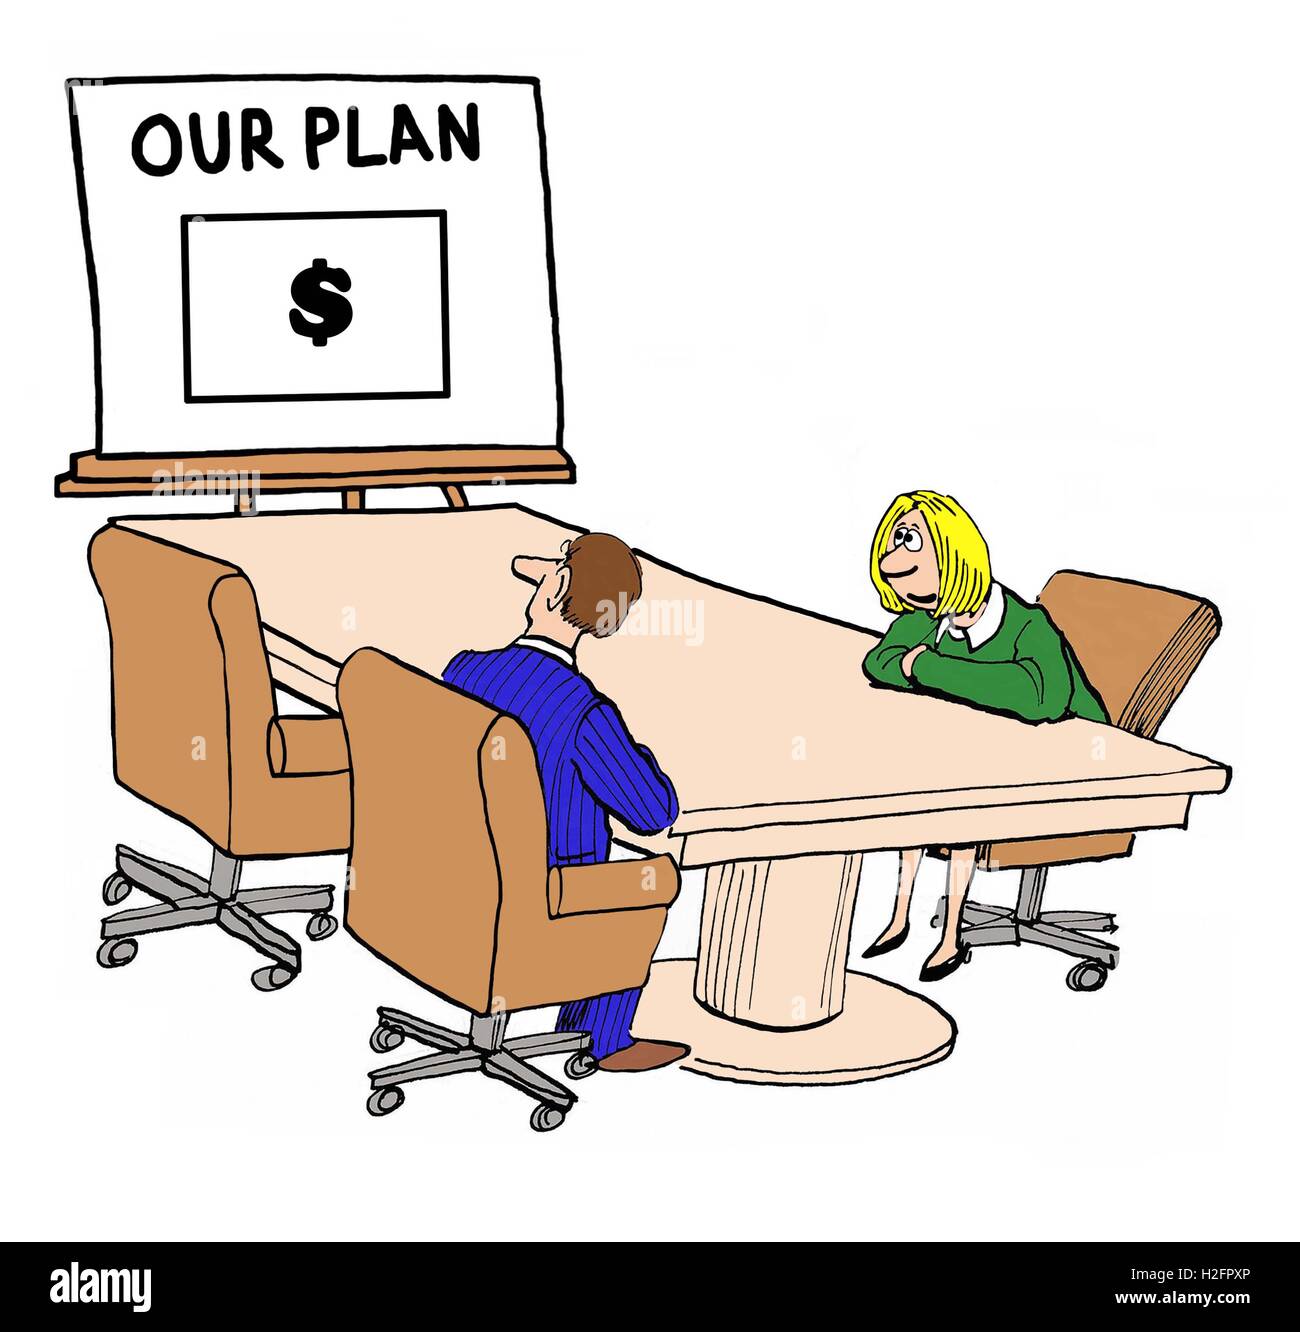 Business color illustration of two businesspeople looking at a plan focused on making money. Stock Photo